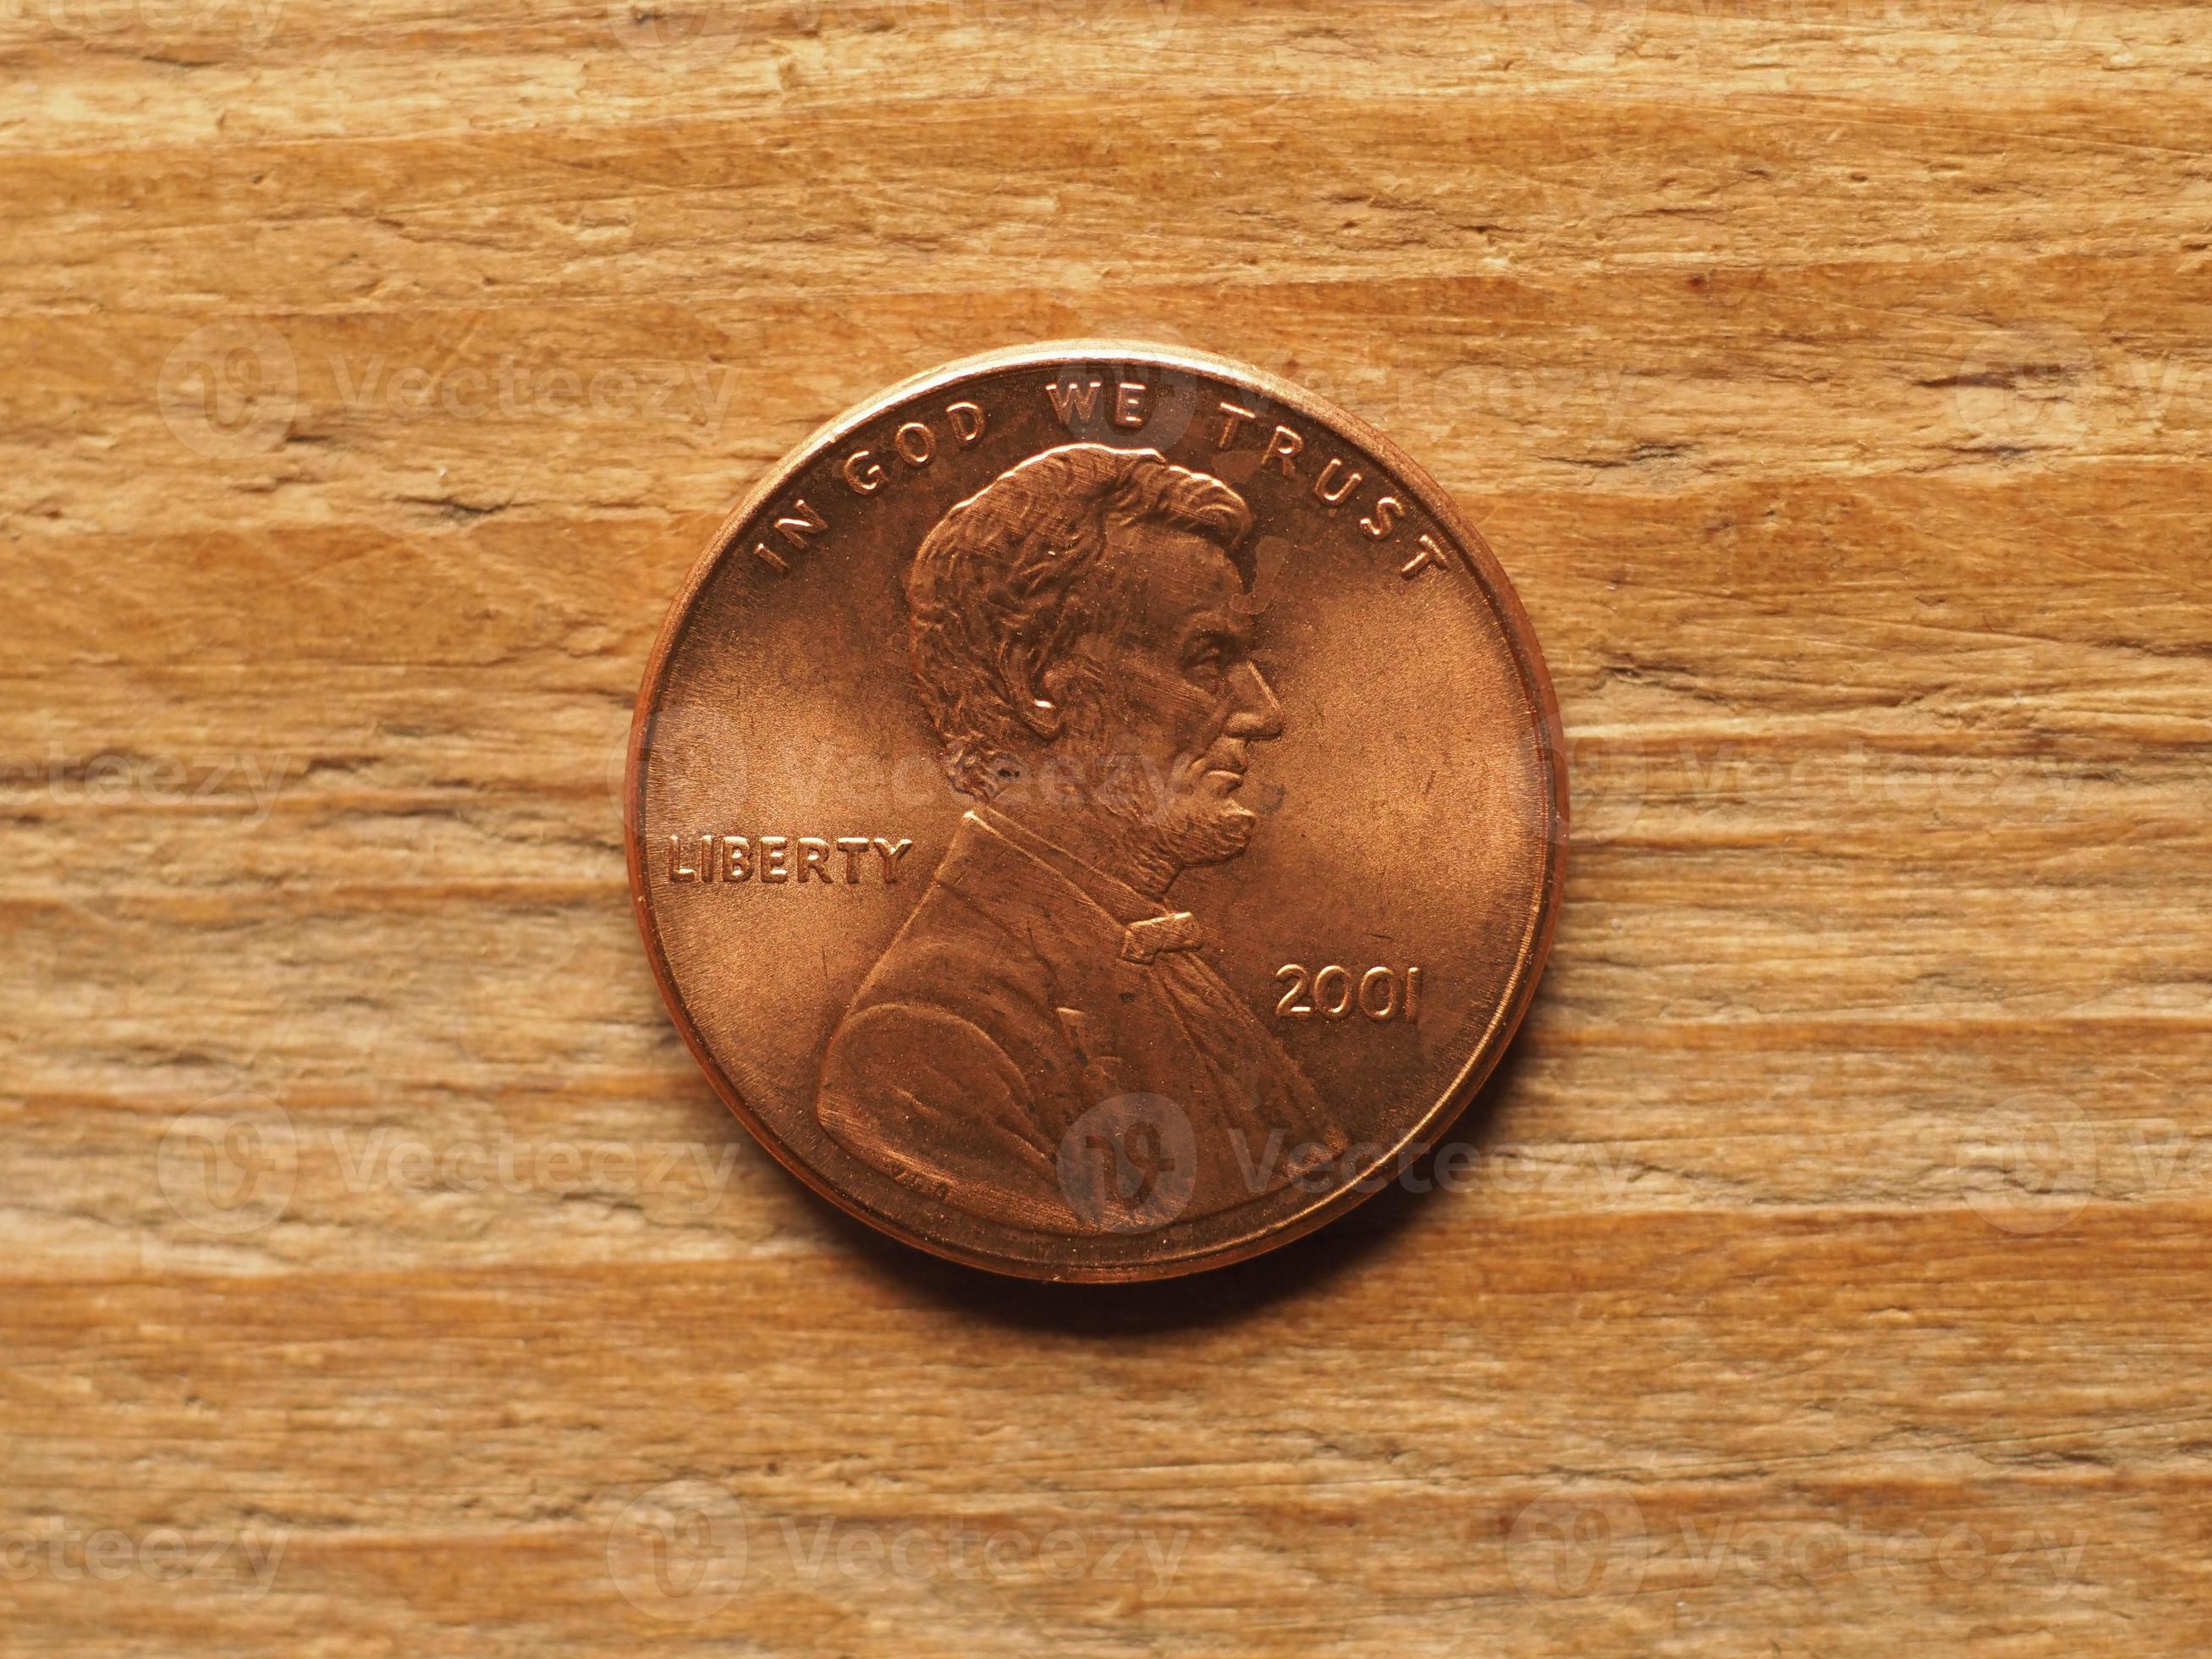 1 cent coin, obverse side showing Lincoln, currency of the USA